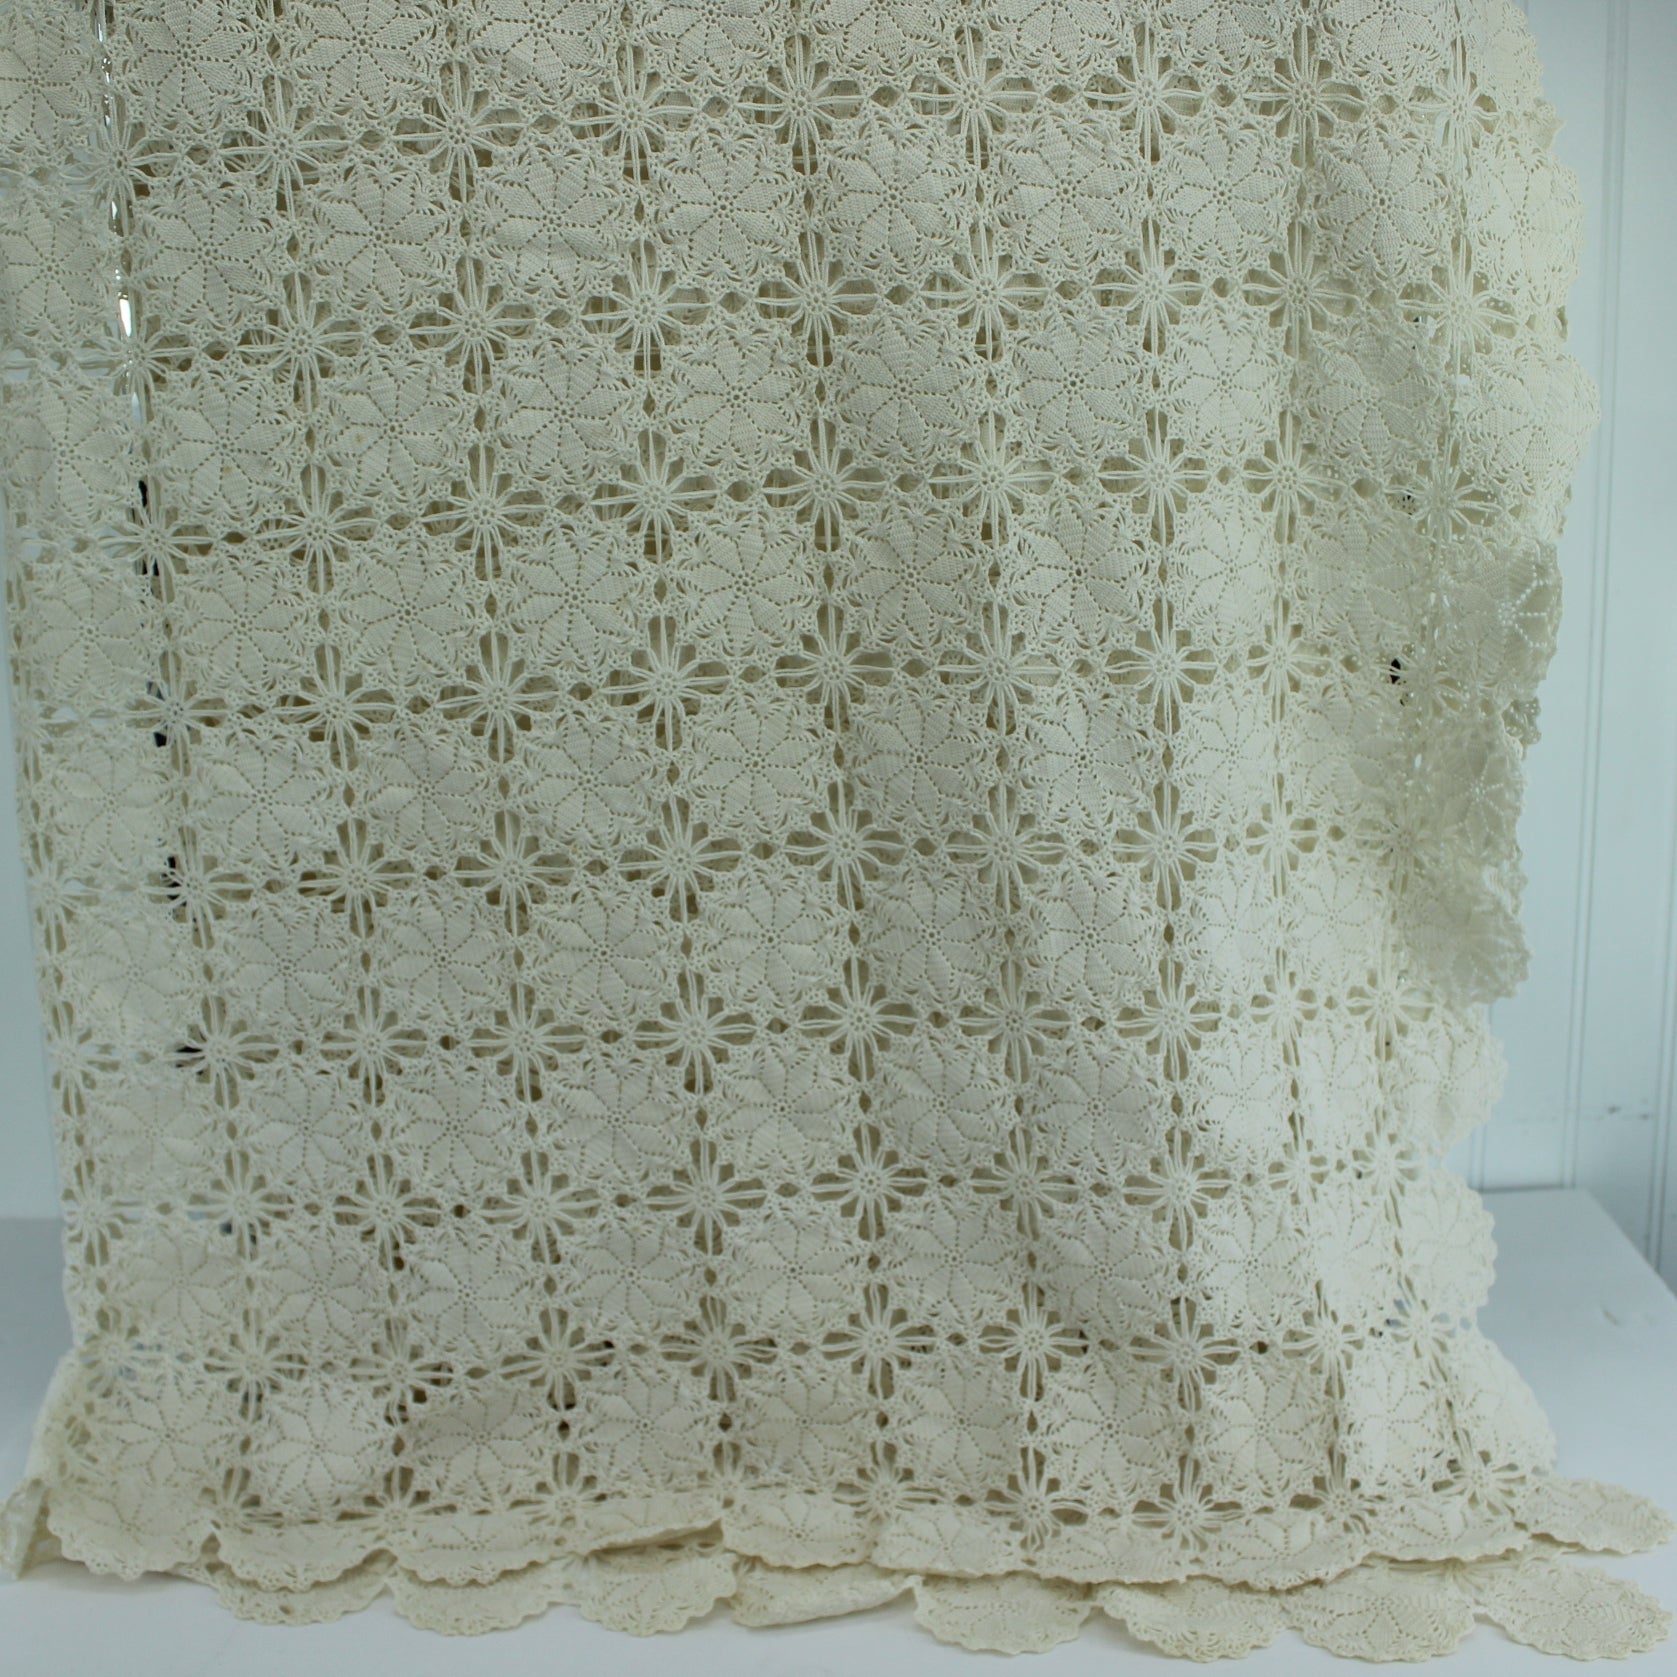 Bone Off White Crochet Tablecloth Fine Hand Made Beauty 58" X 76" intricate well crafted cloth used